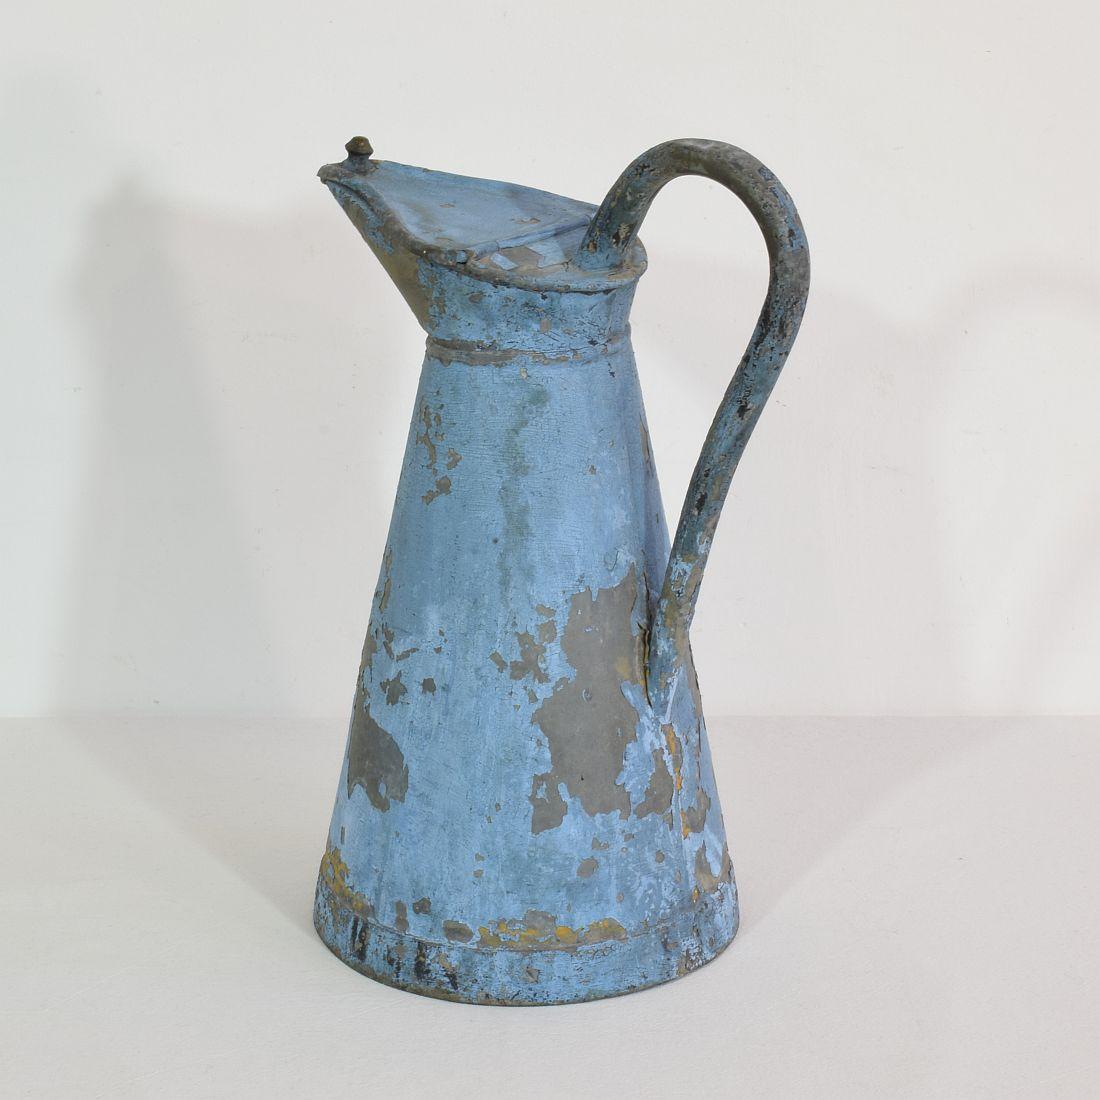 Stunning zinc ewer or water jug with stunning old blue paint. 
France, circa 1880-1900. Weathered.